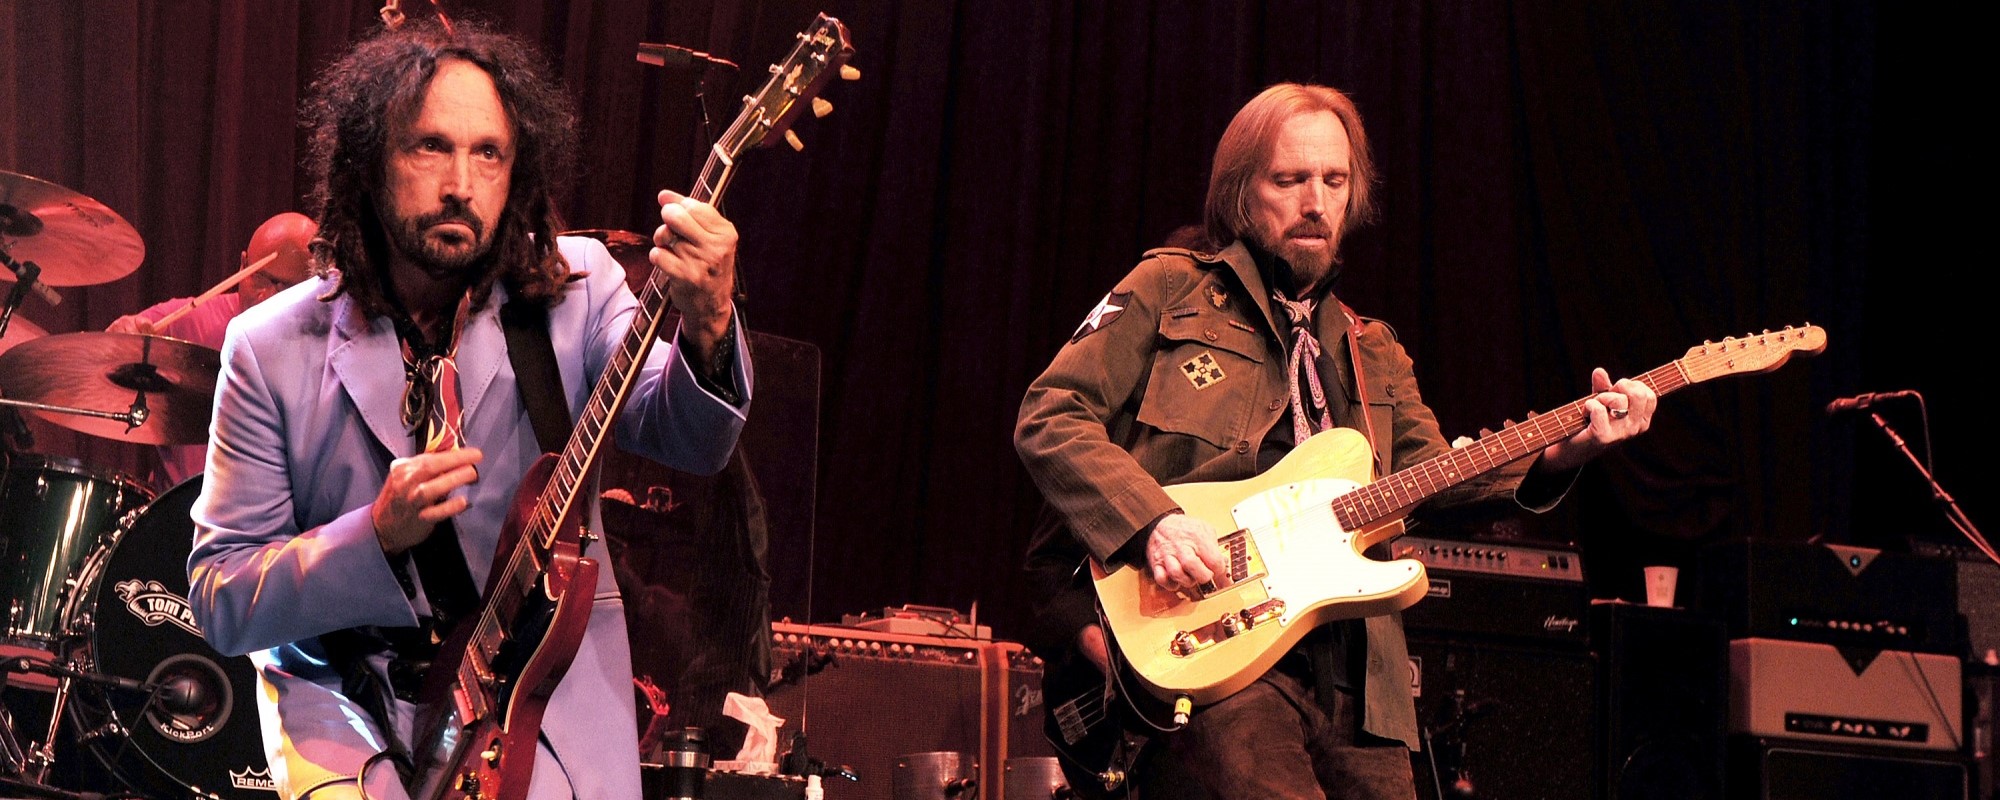 Heartbreakers Guitarist Mike Campbell Says Tom Petty Would Be “Really, Really Happy” with New ‘Petty Country’ Tribute Album